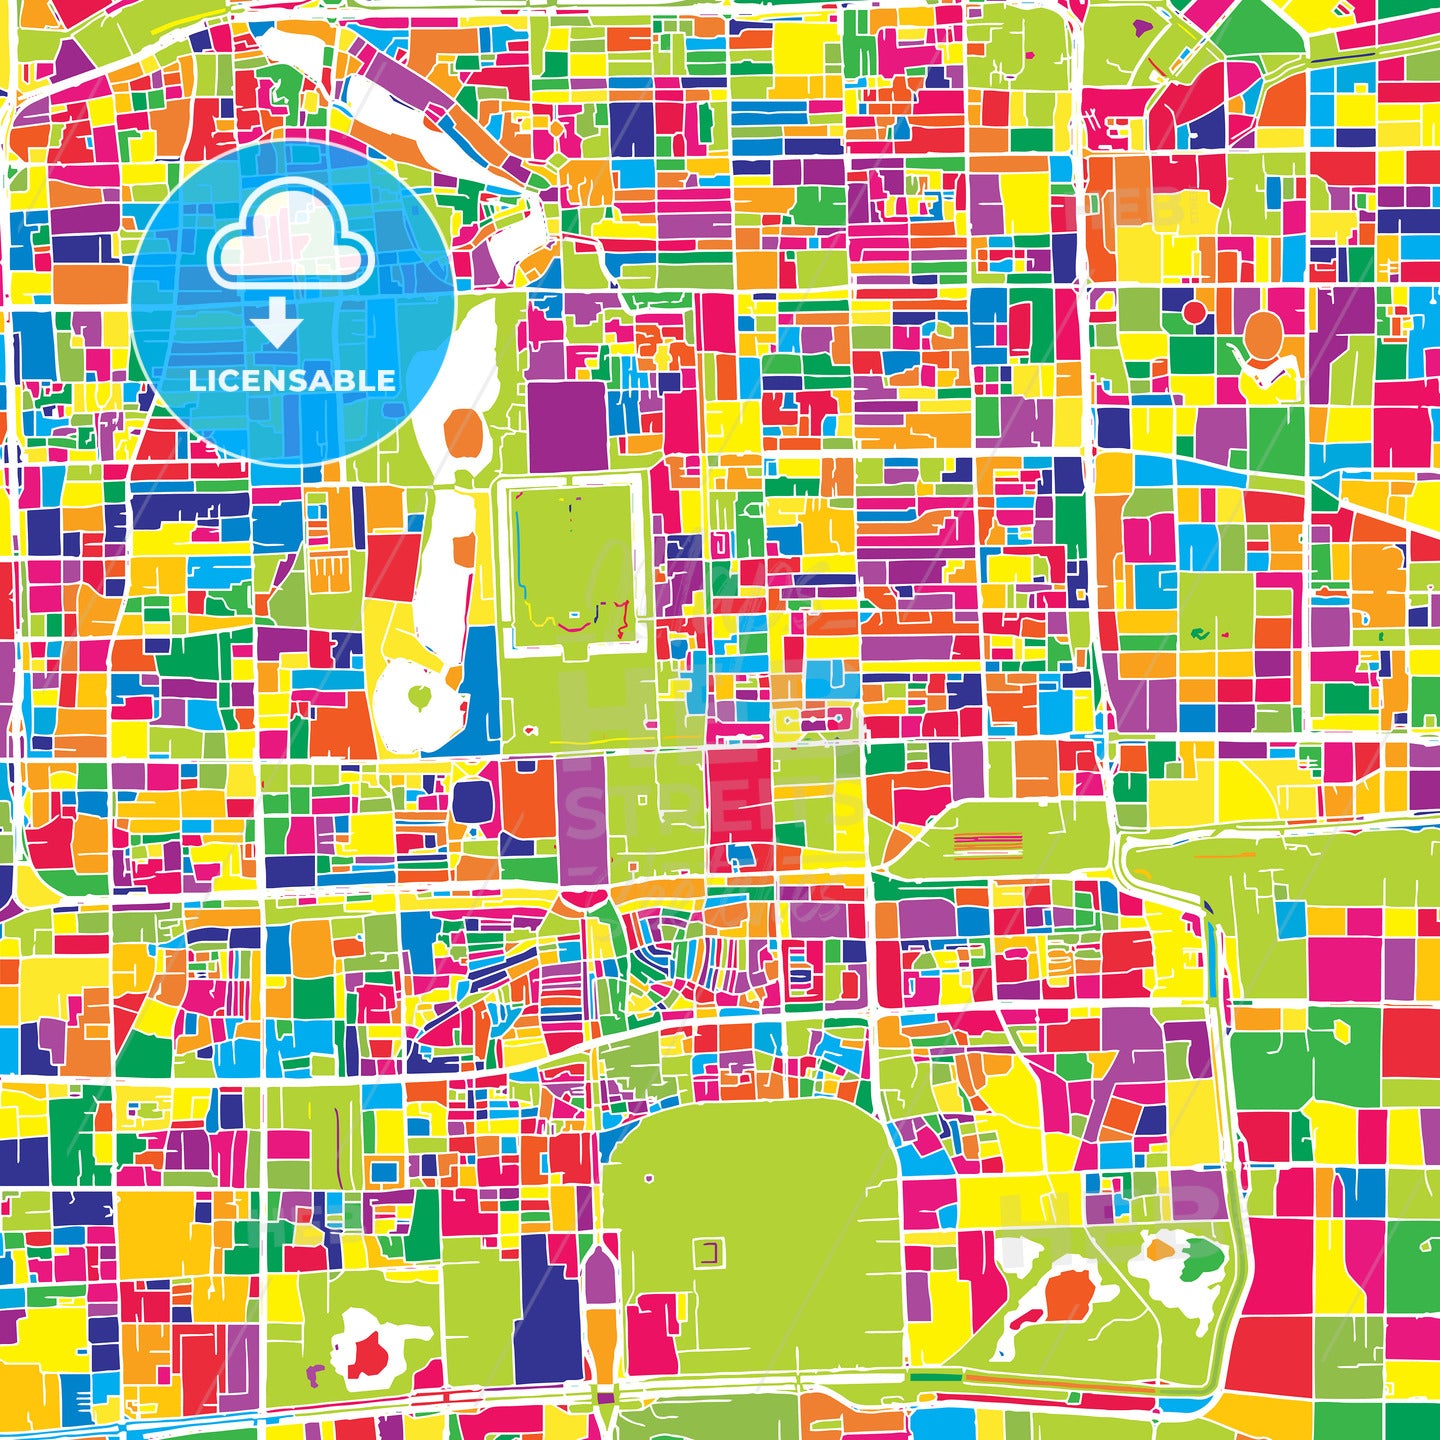 Beijing, China, colorful vector map